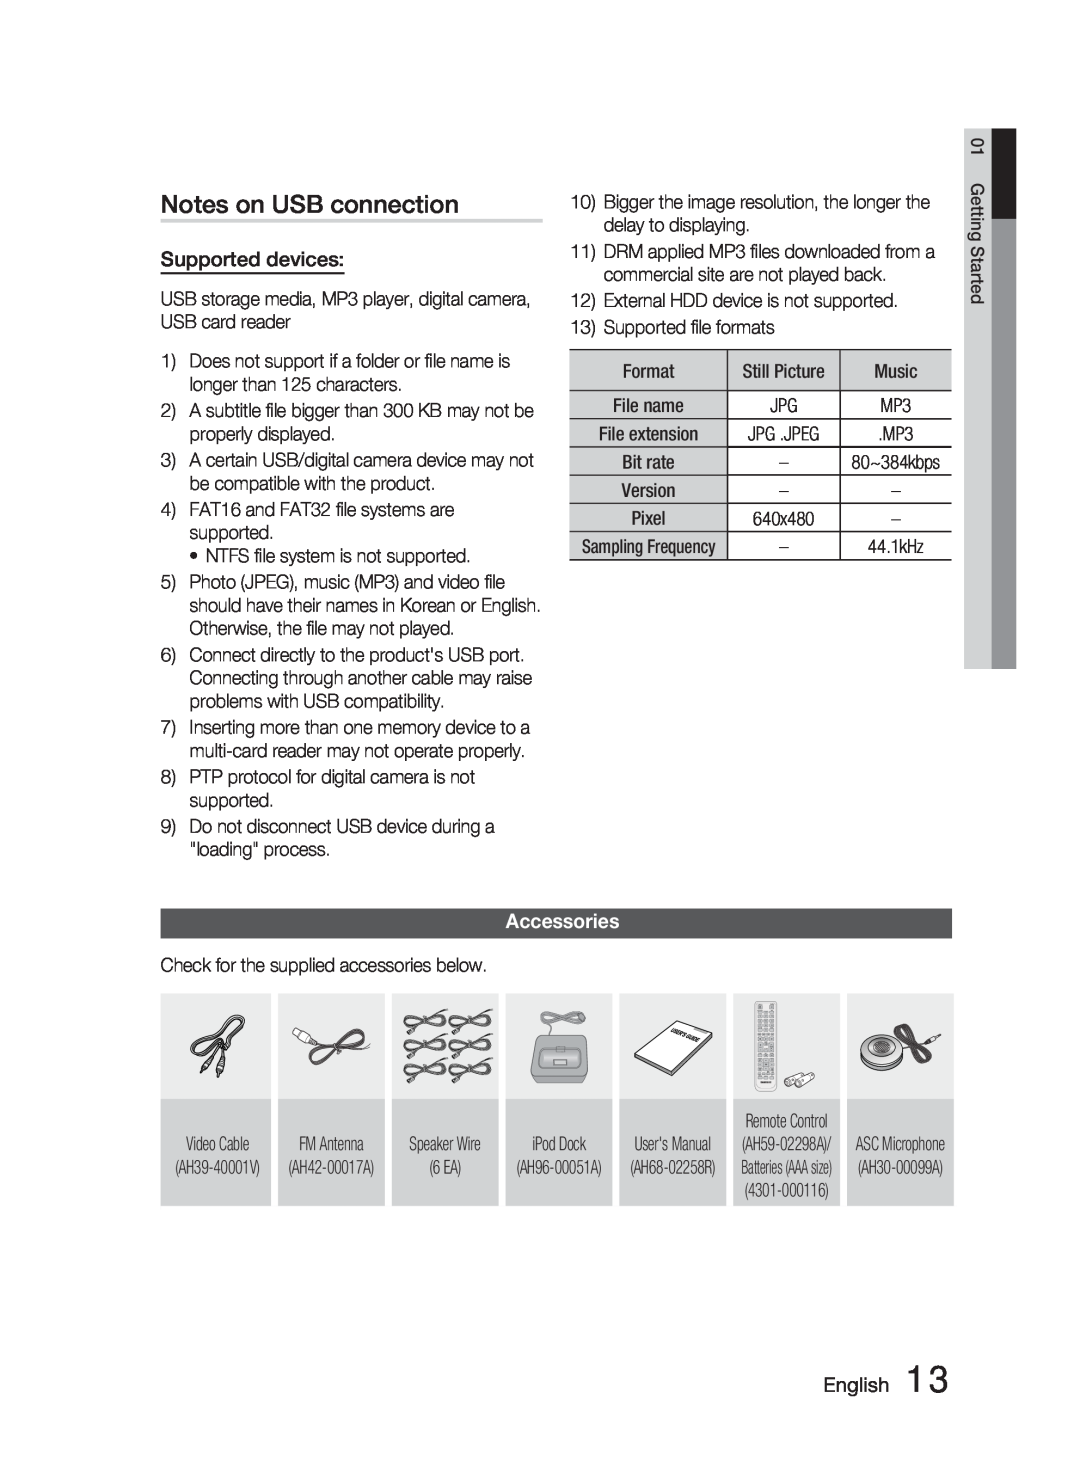 Samsung HT-C5500 user manual Notes on USB connection, Supported devices, Accessories, English 